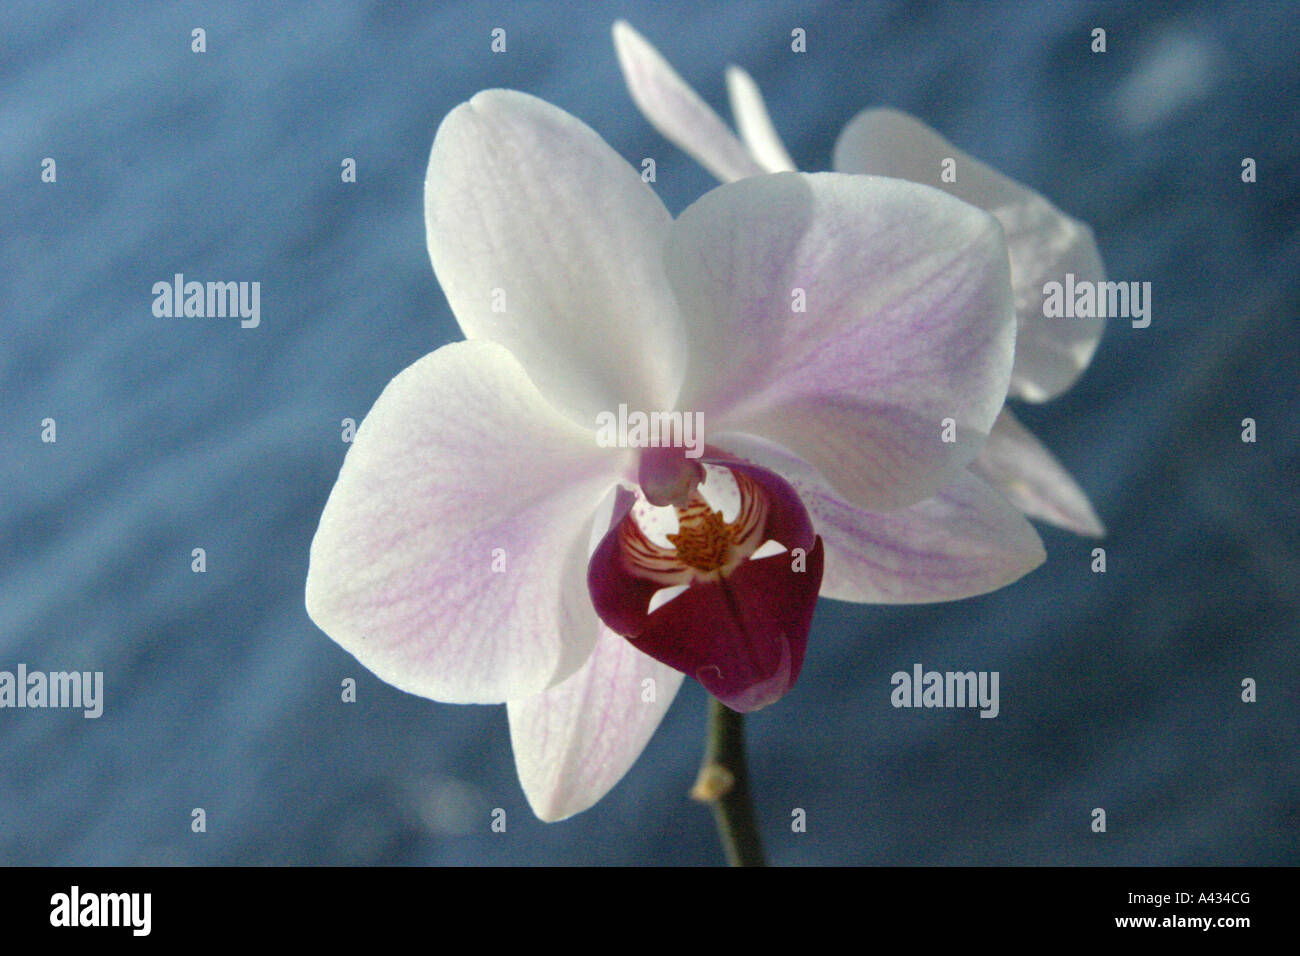 An orchid against a dark blue background Stock Photo